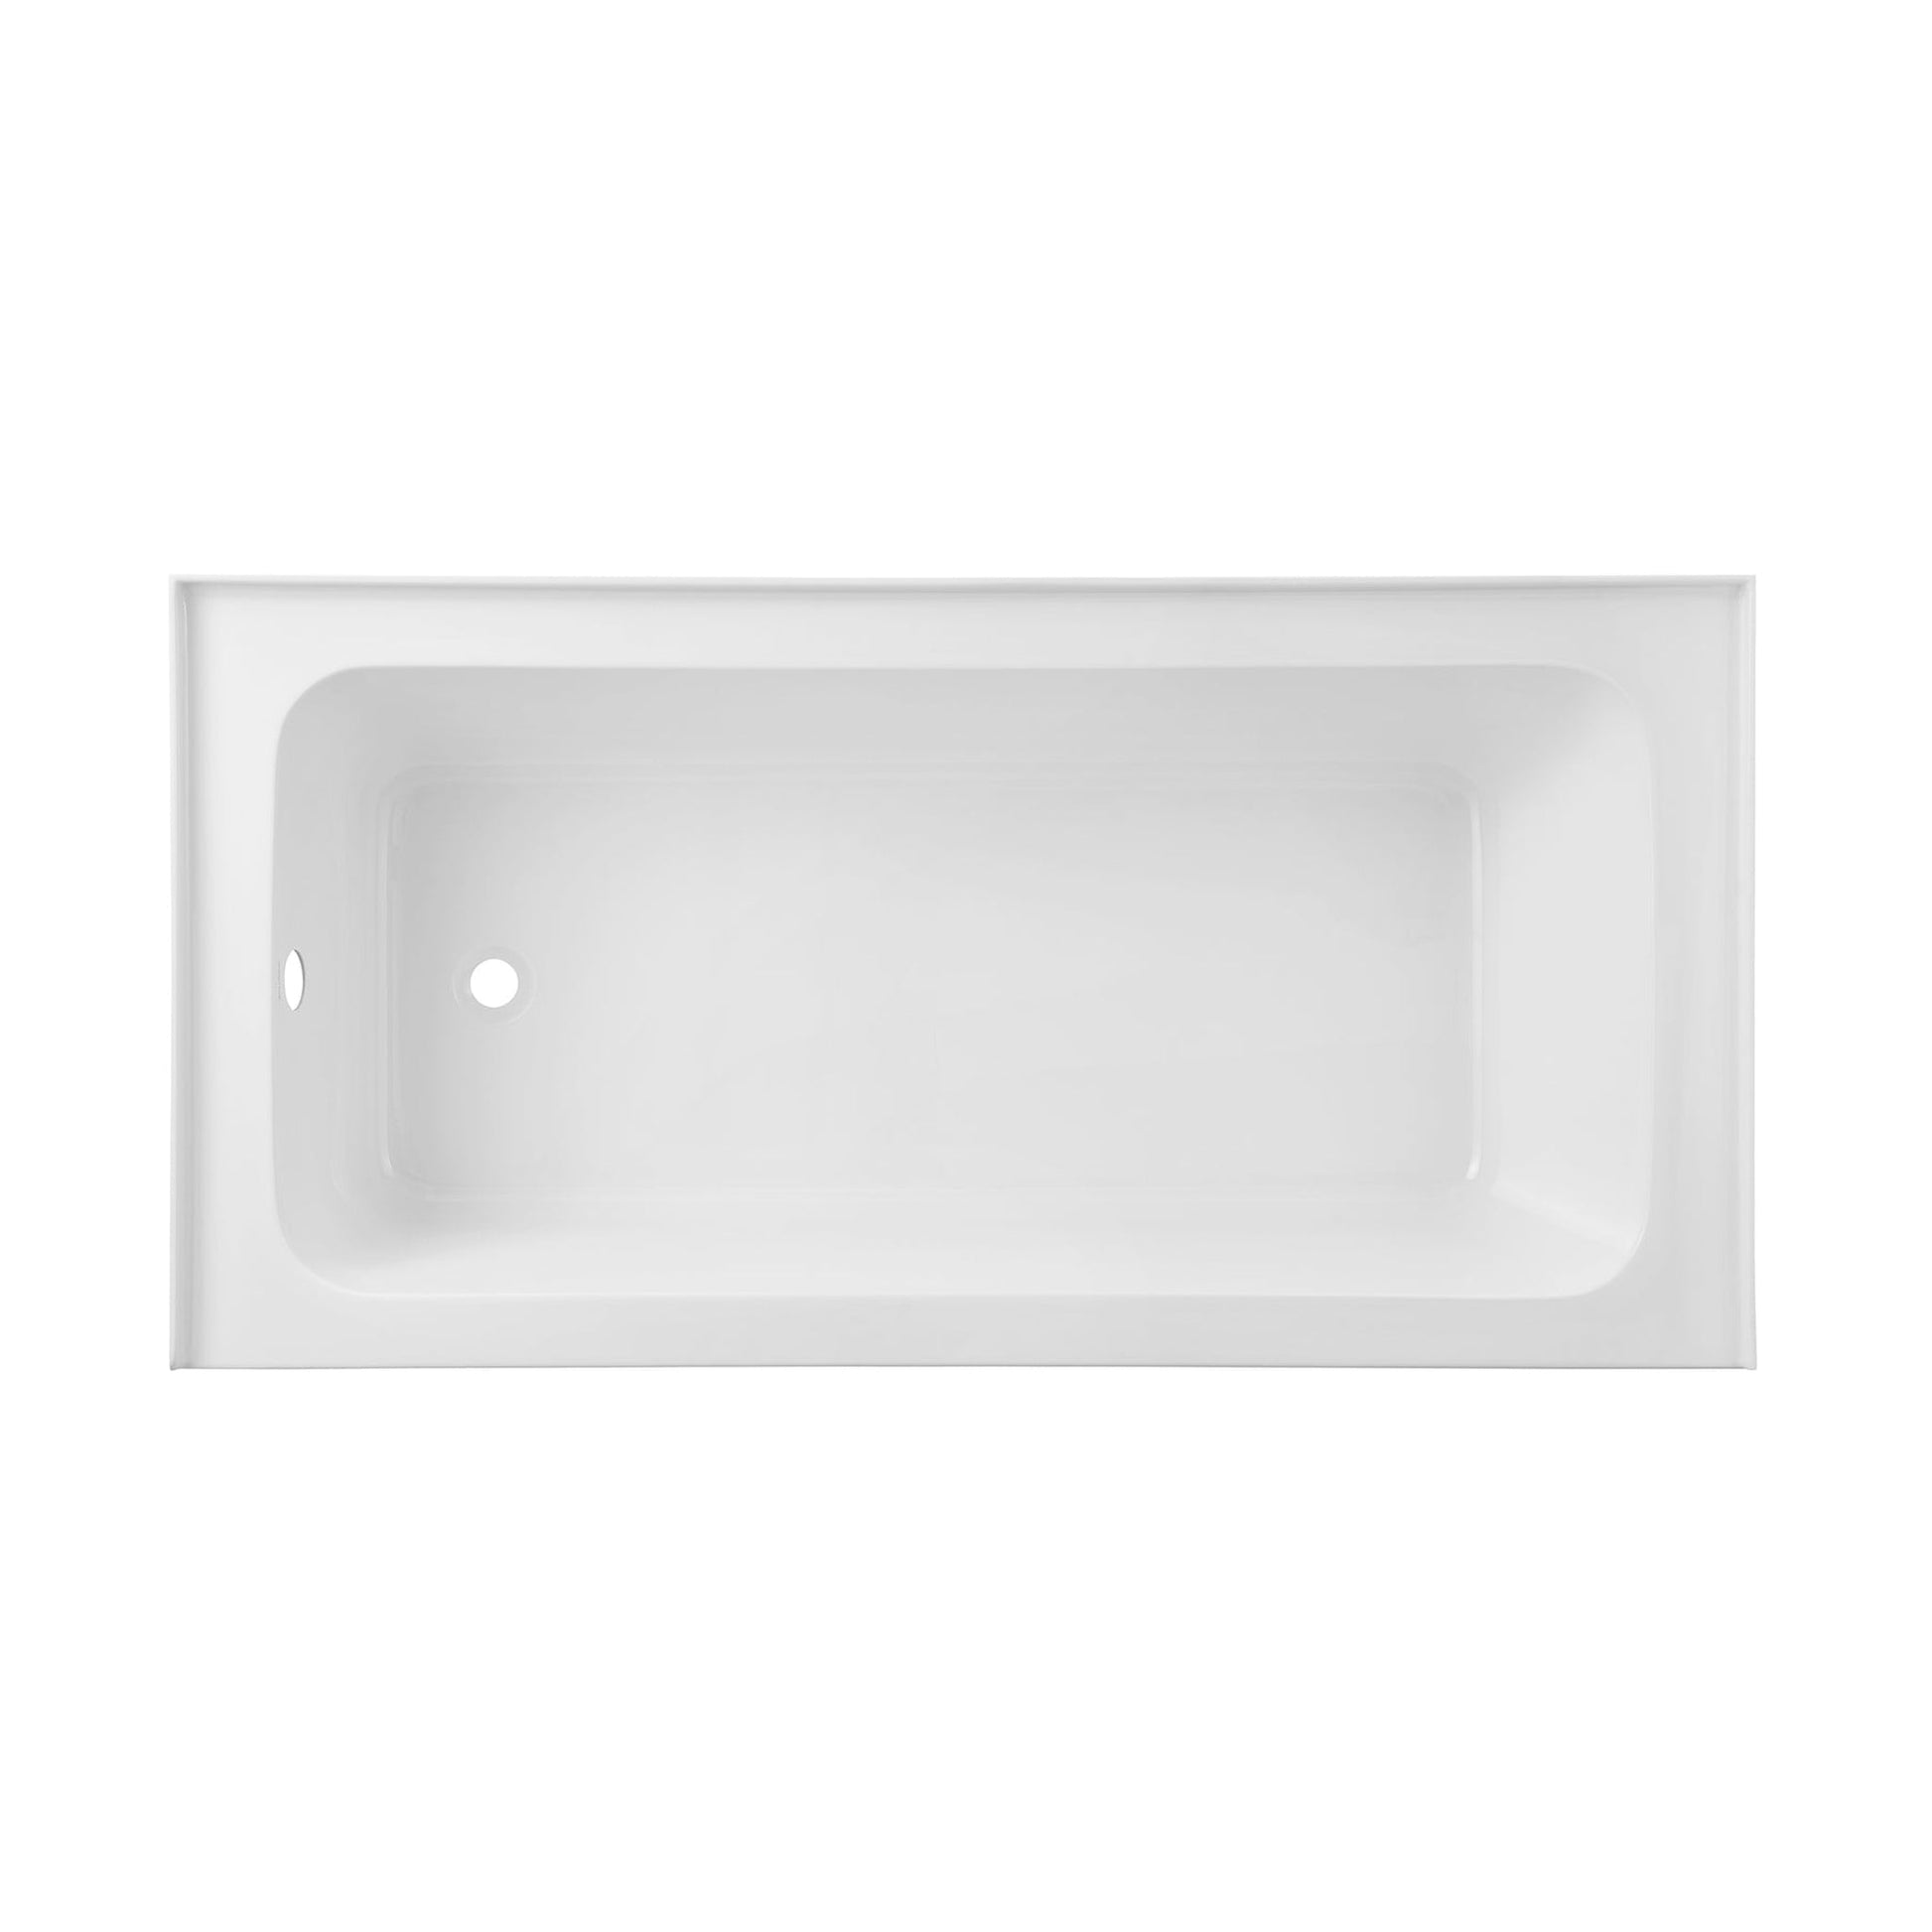 Swiss Madison Virage 60" x 30" White Left-Hand Drain Alcove Bathtub With Built-In Flange & Sleek Apron Front